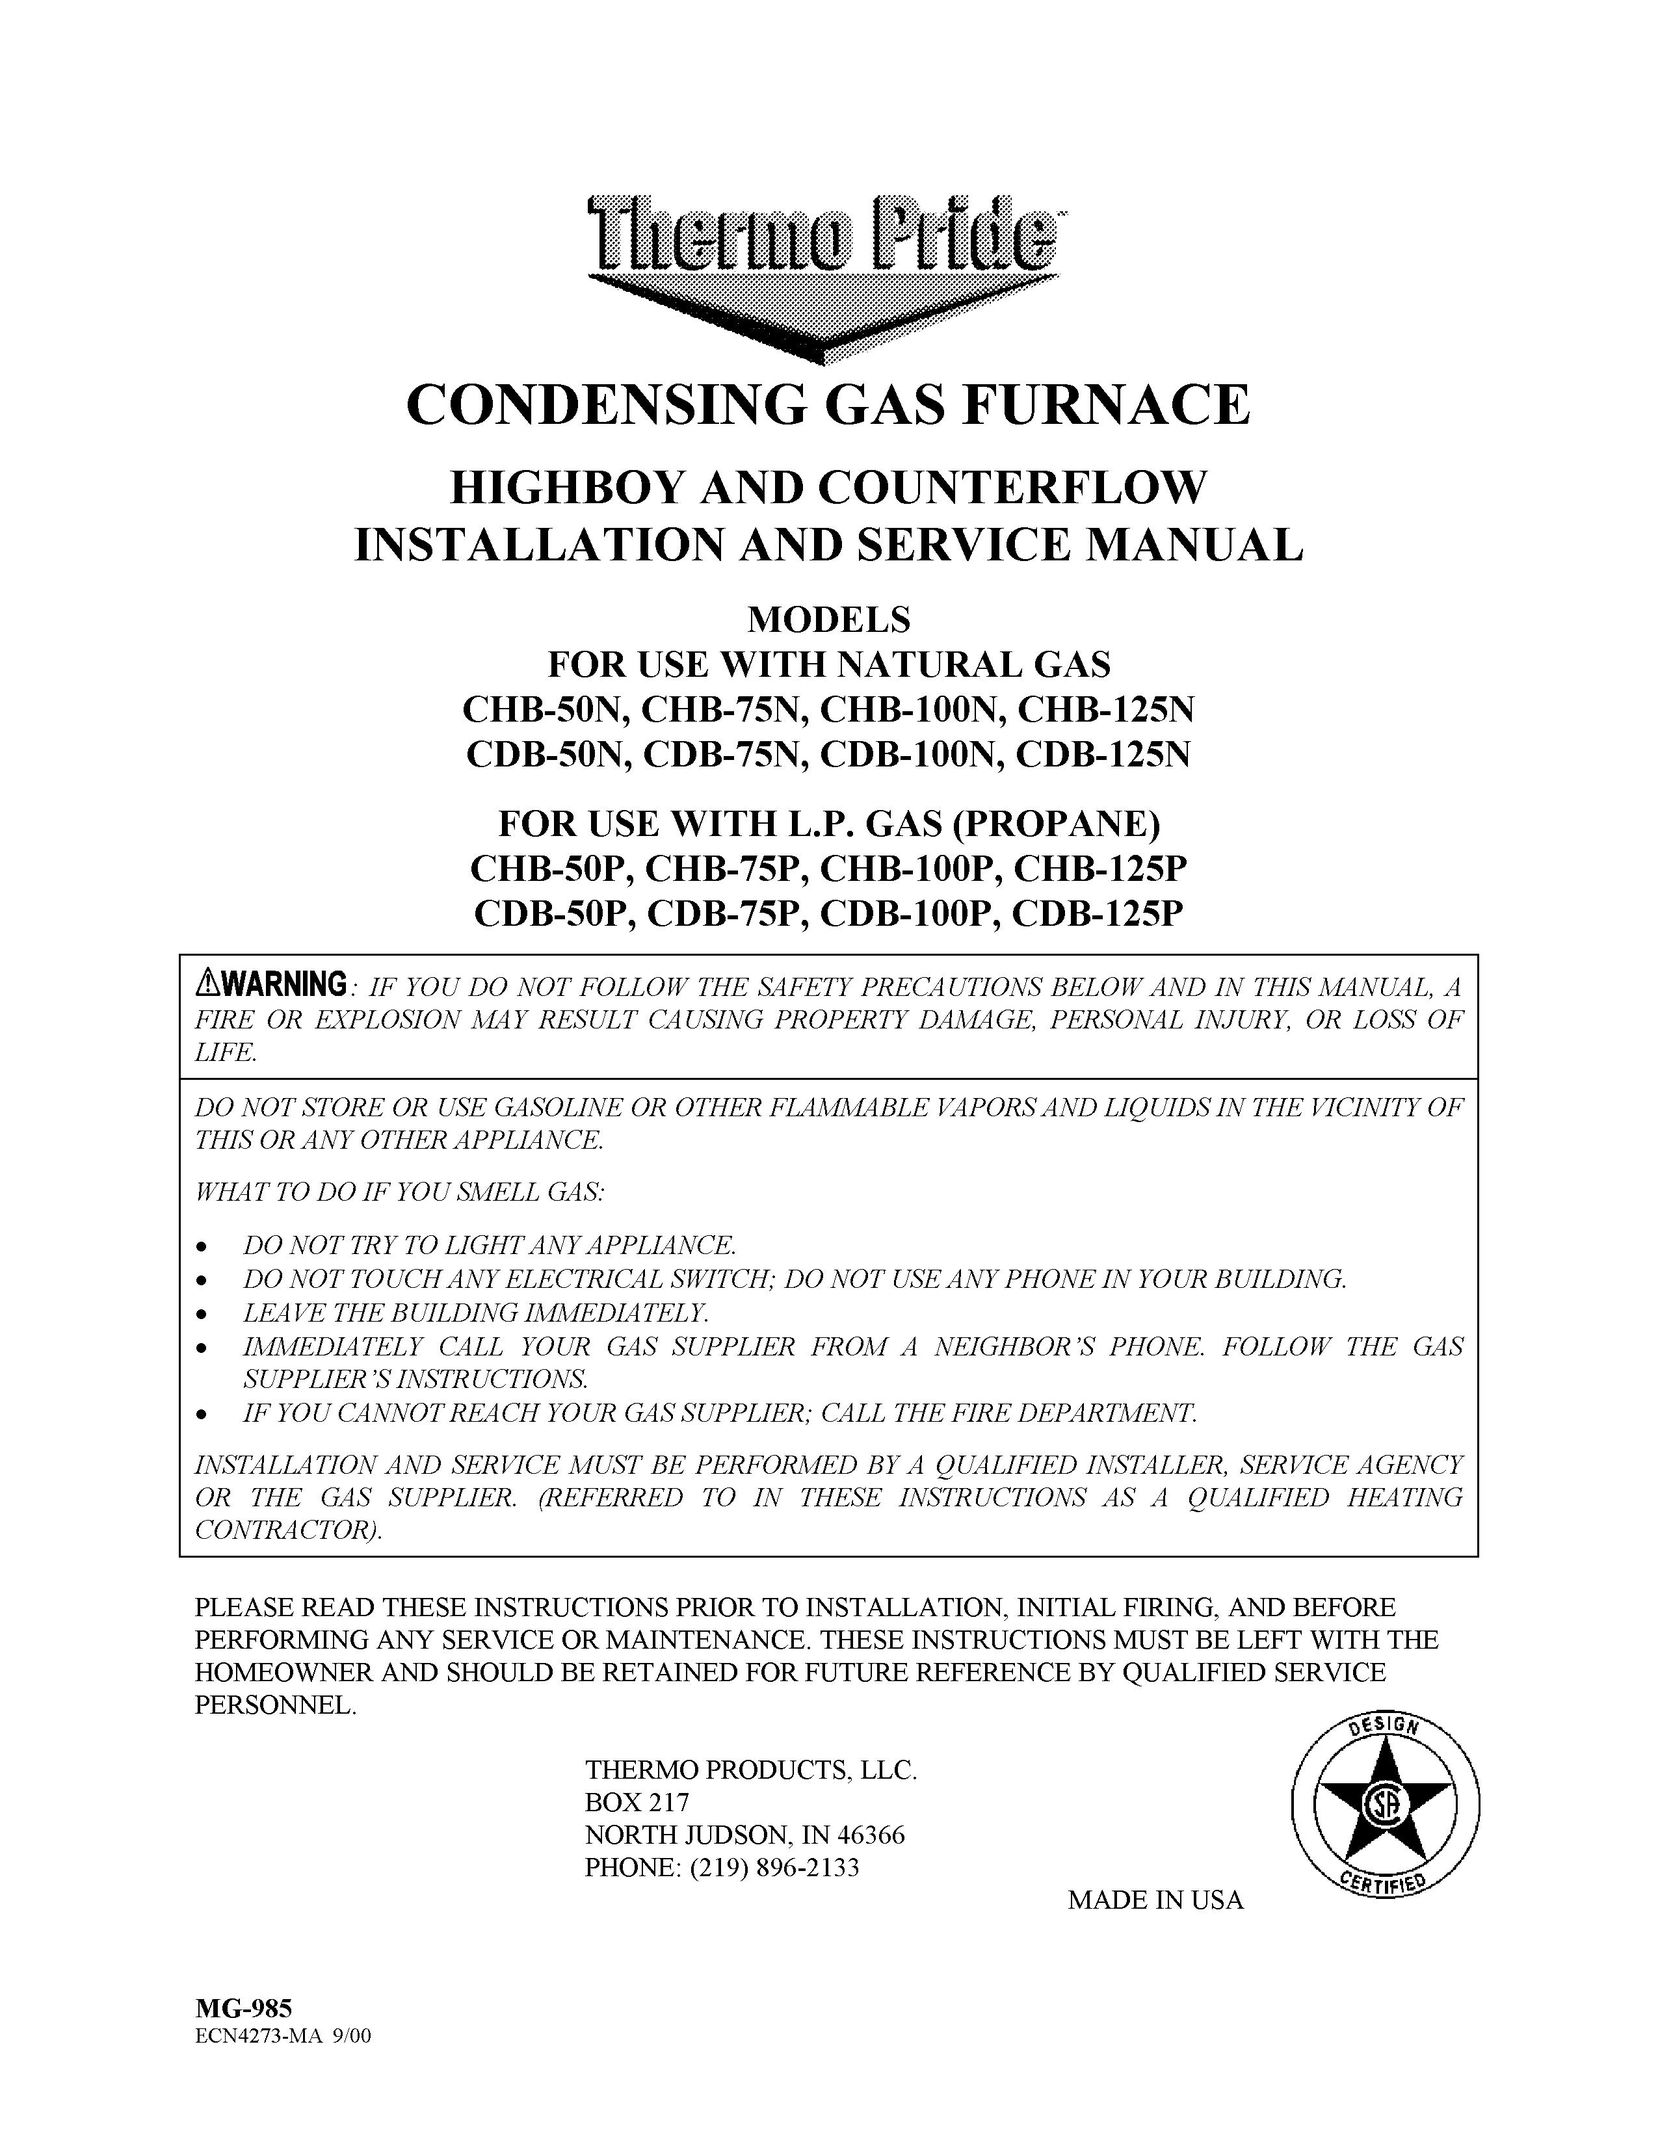 Thermo Products CDB-50N Furnace User Manual